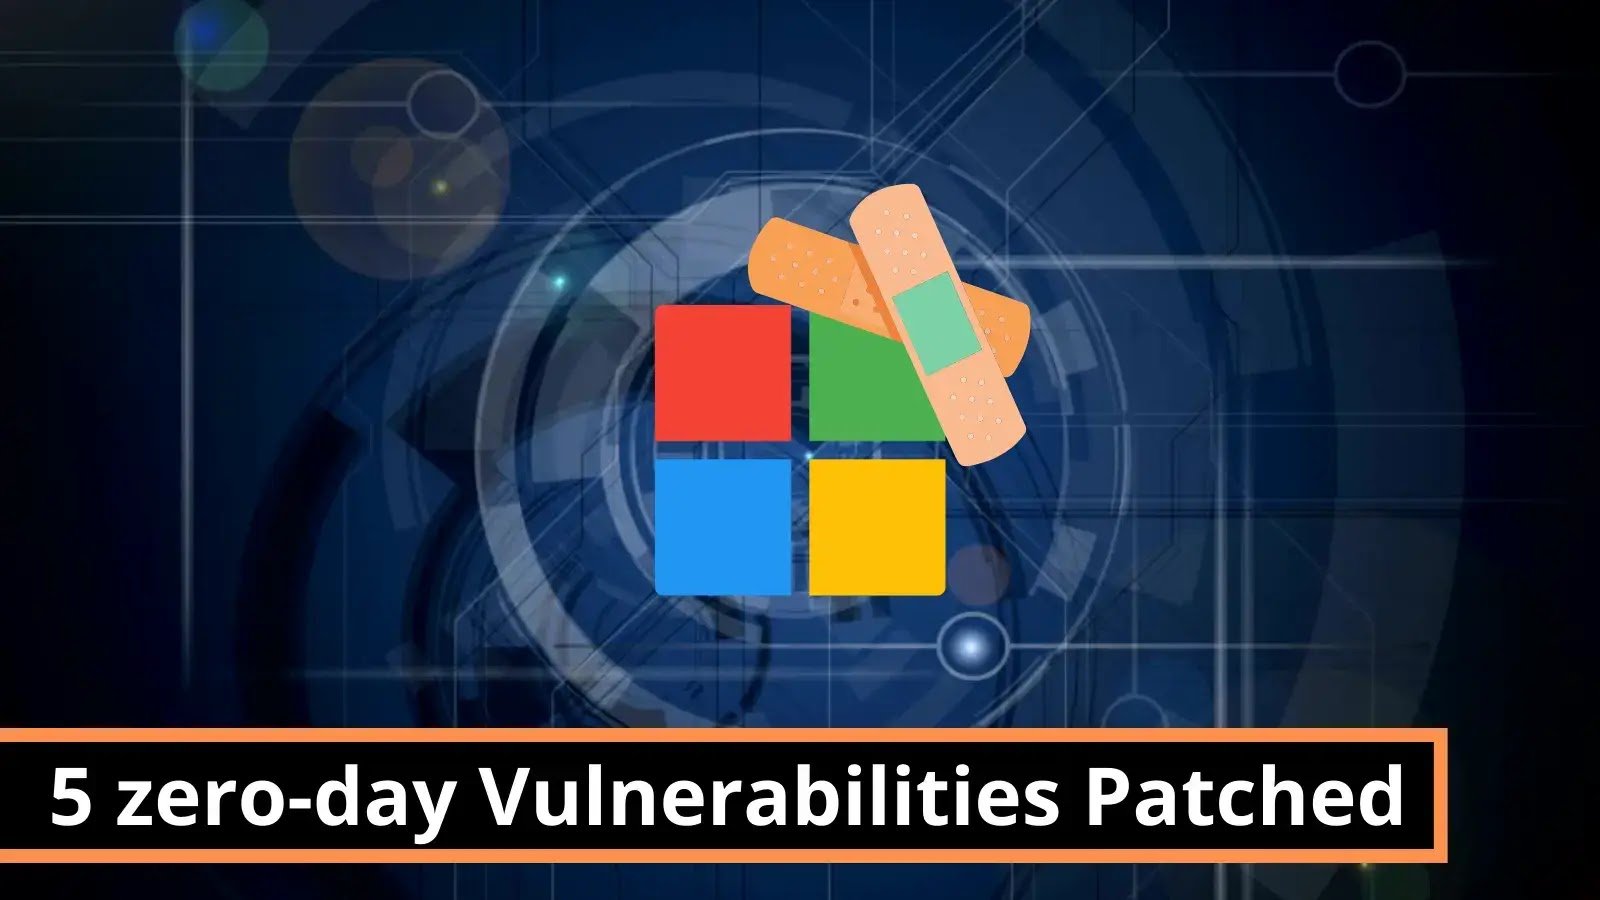 5 New Zero-day Vulnerabilities Patched in the Microsoft Security Update